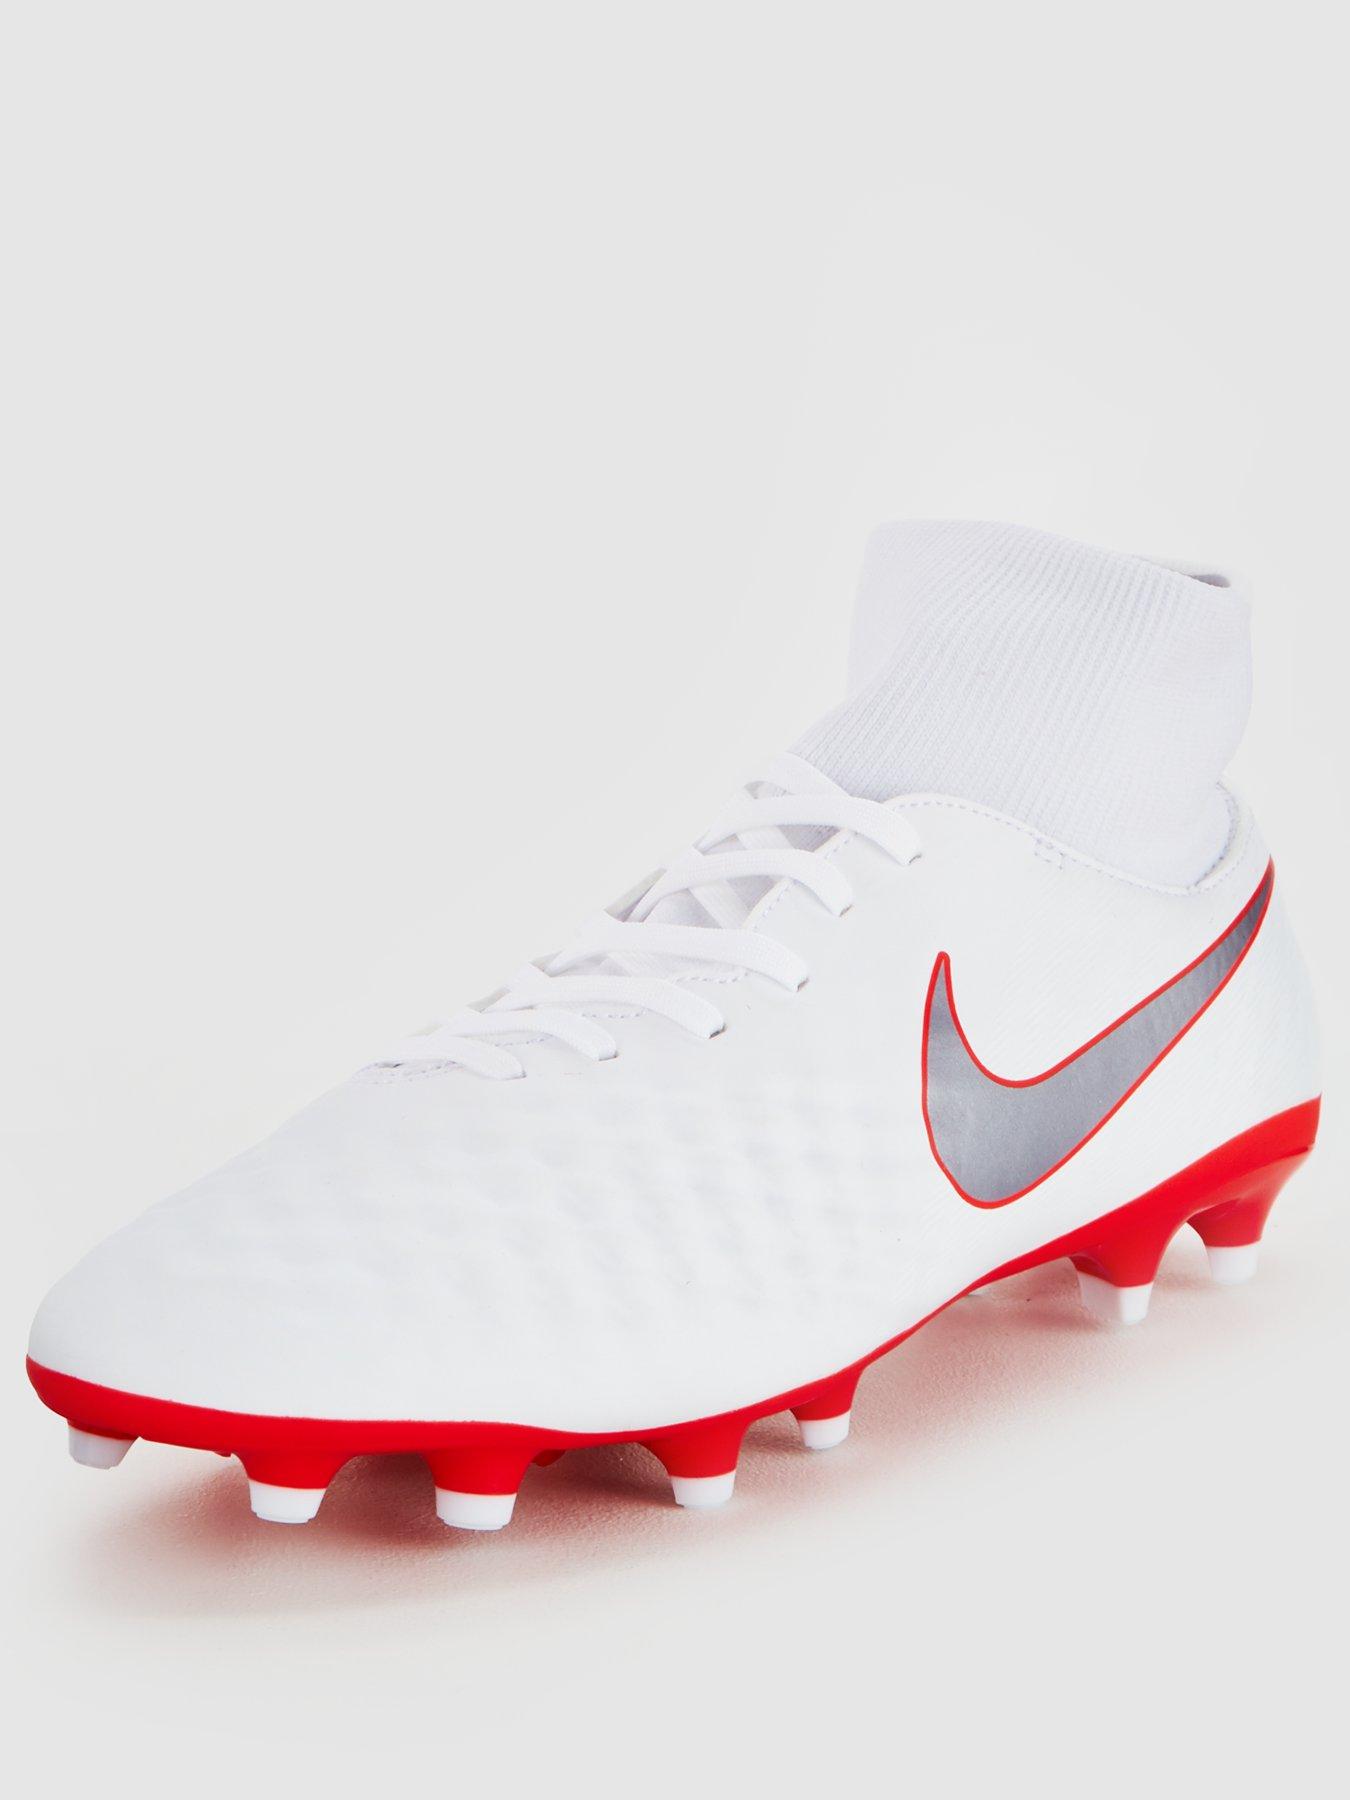 Cheap Nike MagistaX Proximo IC Chilling Red Bright Crimson